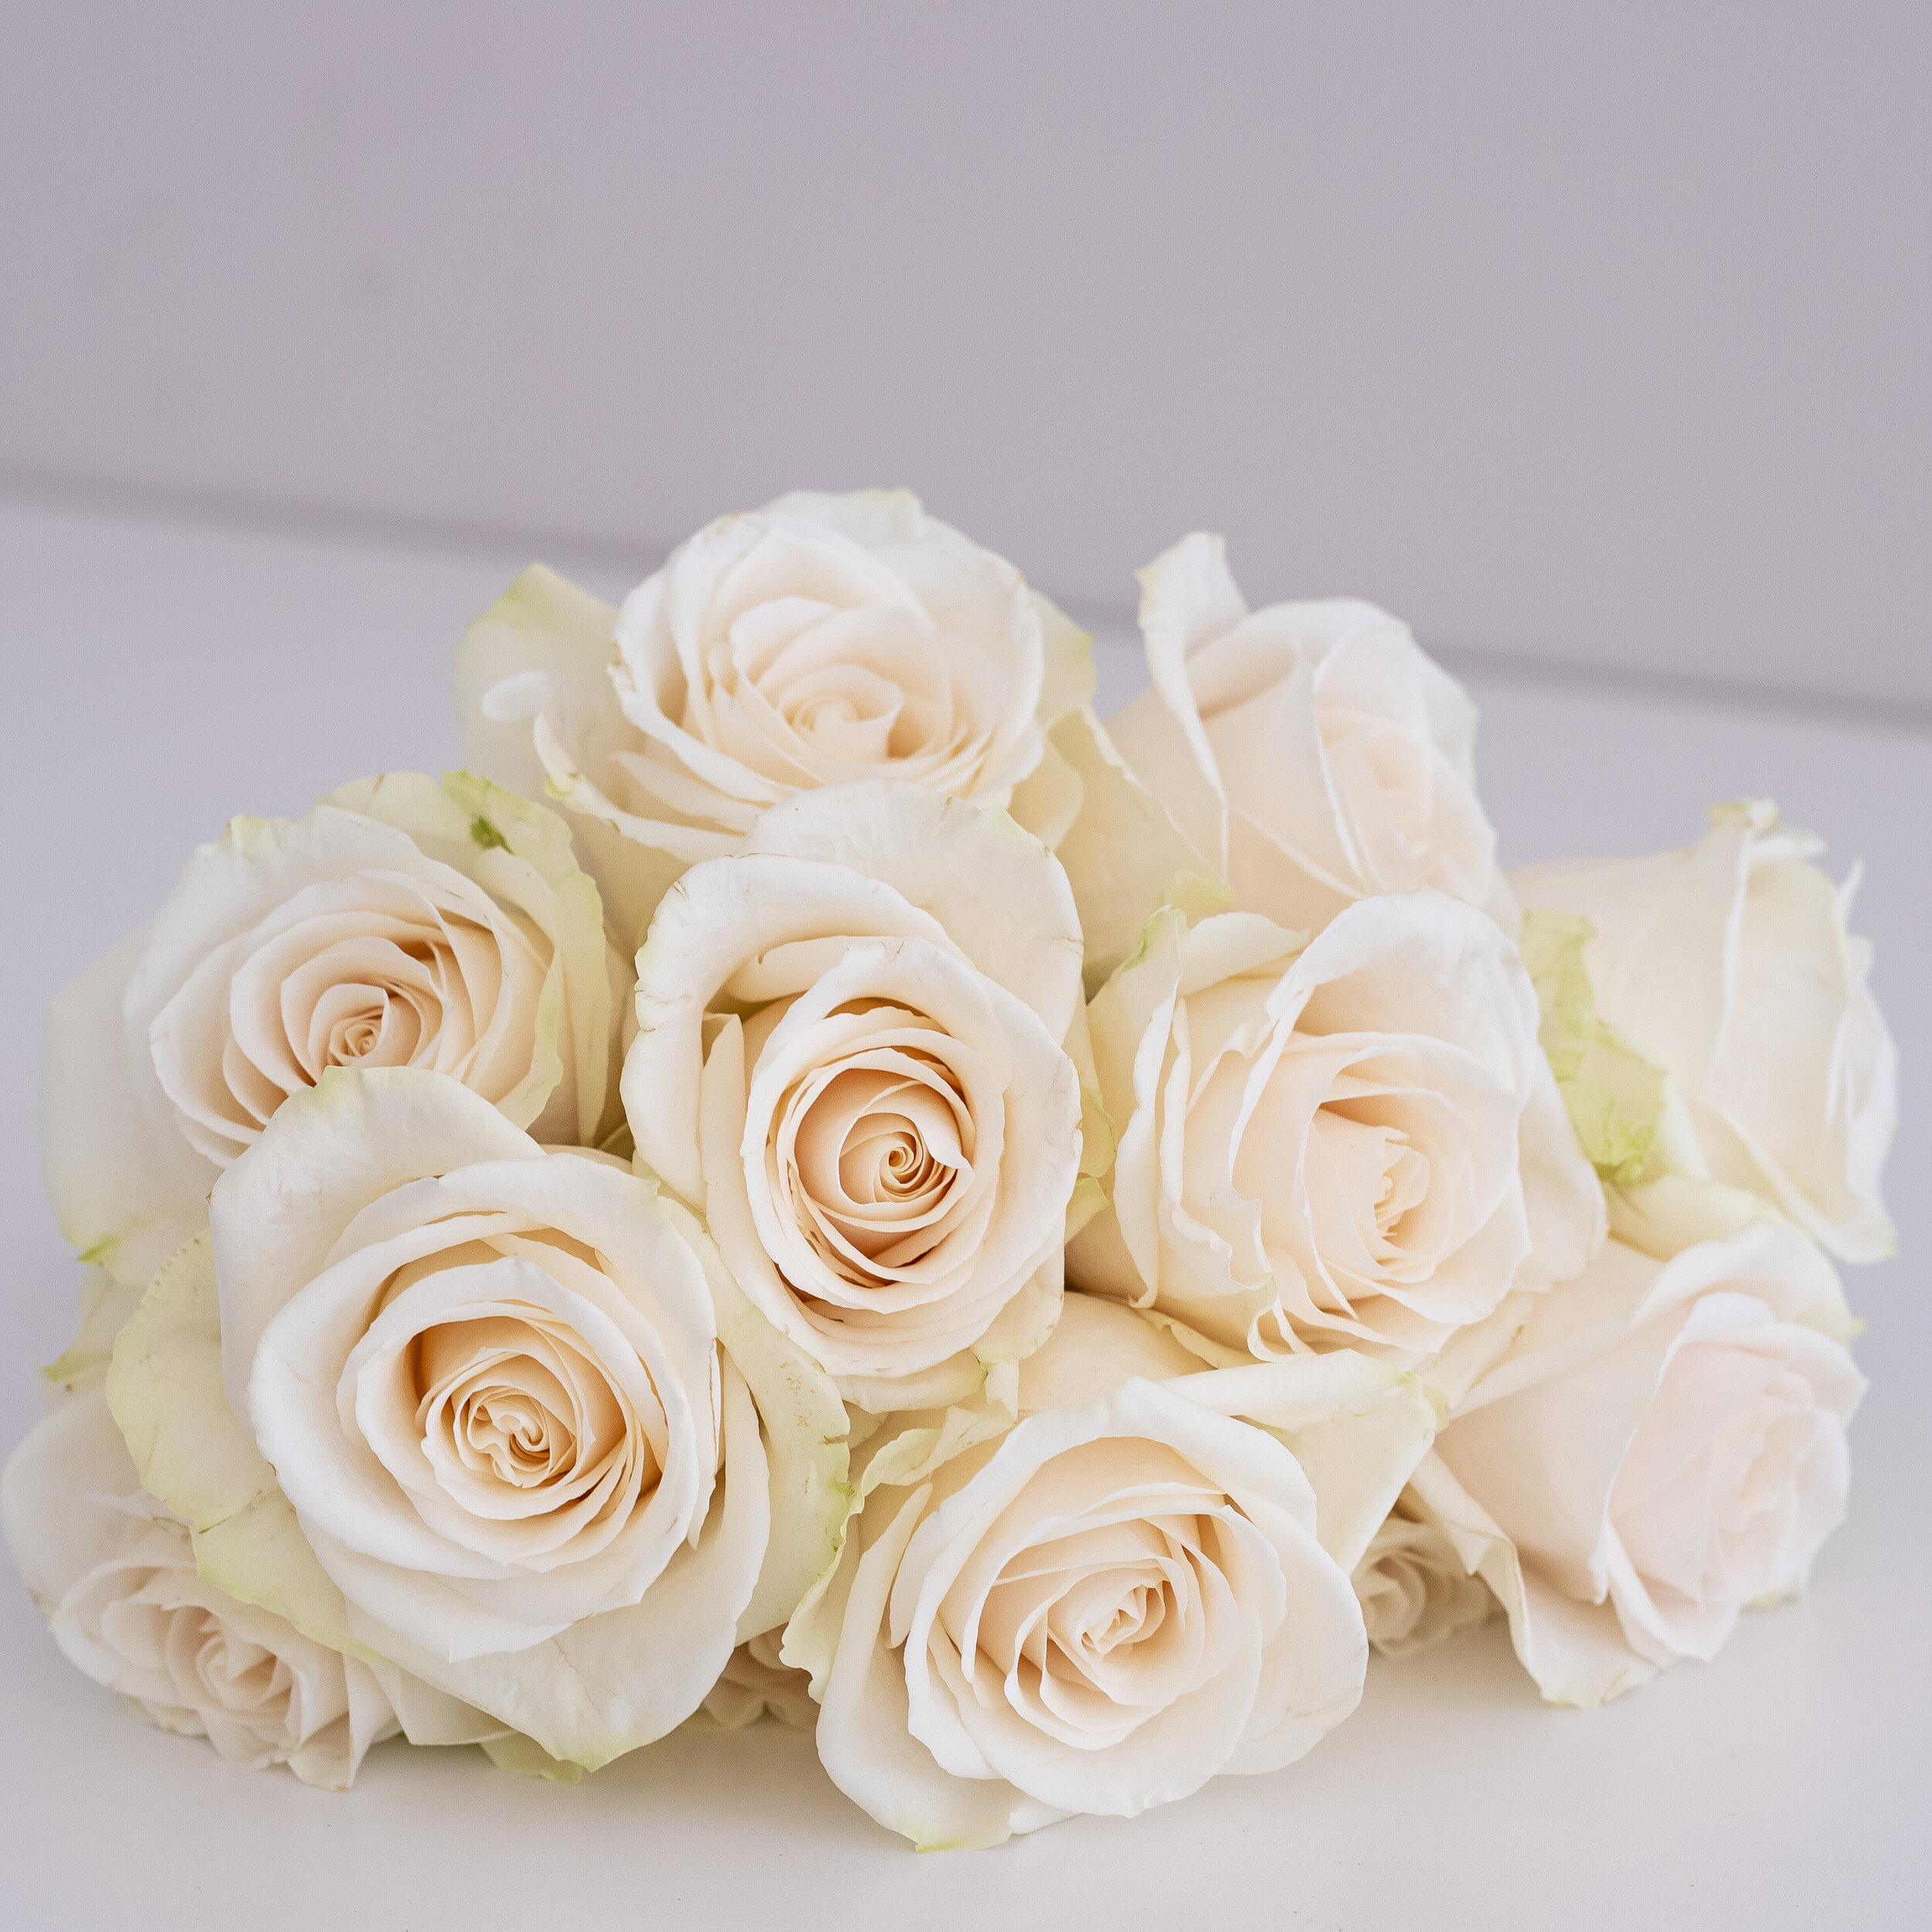 A close up of several white roses laying on a table